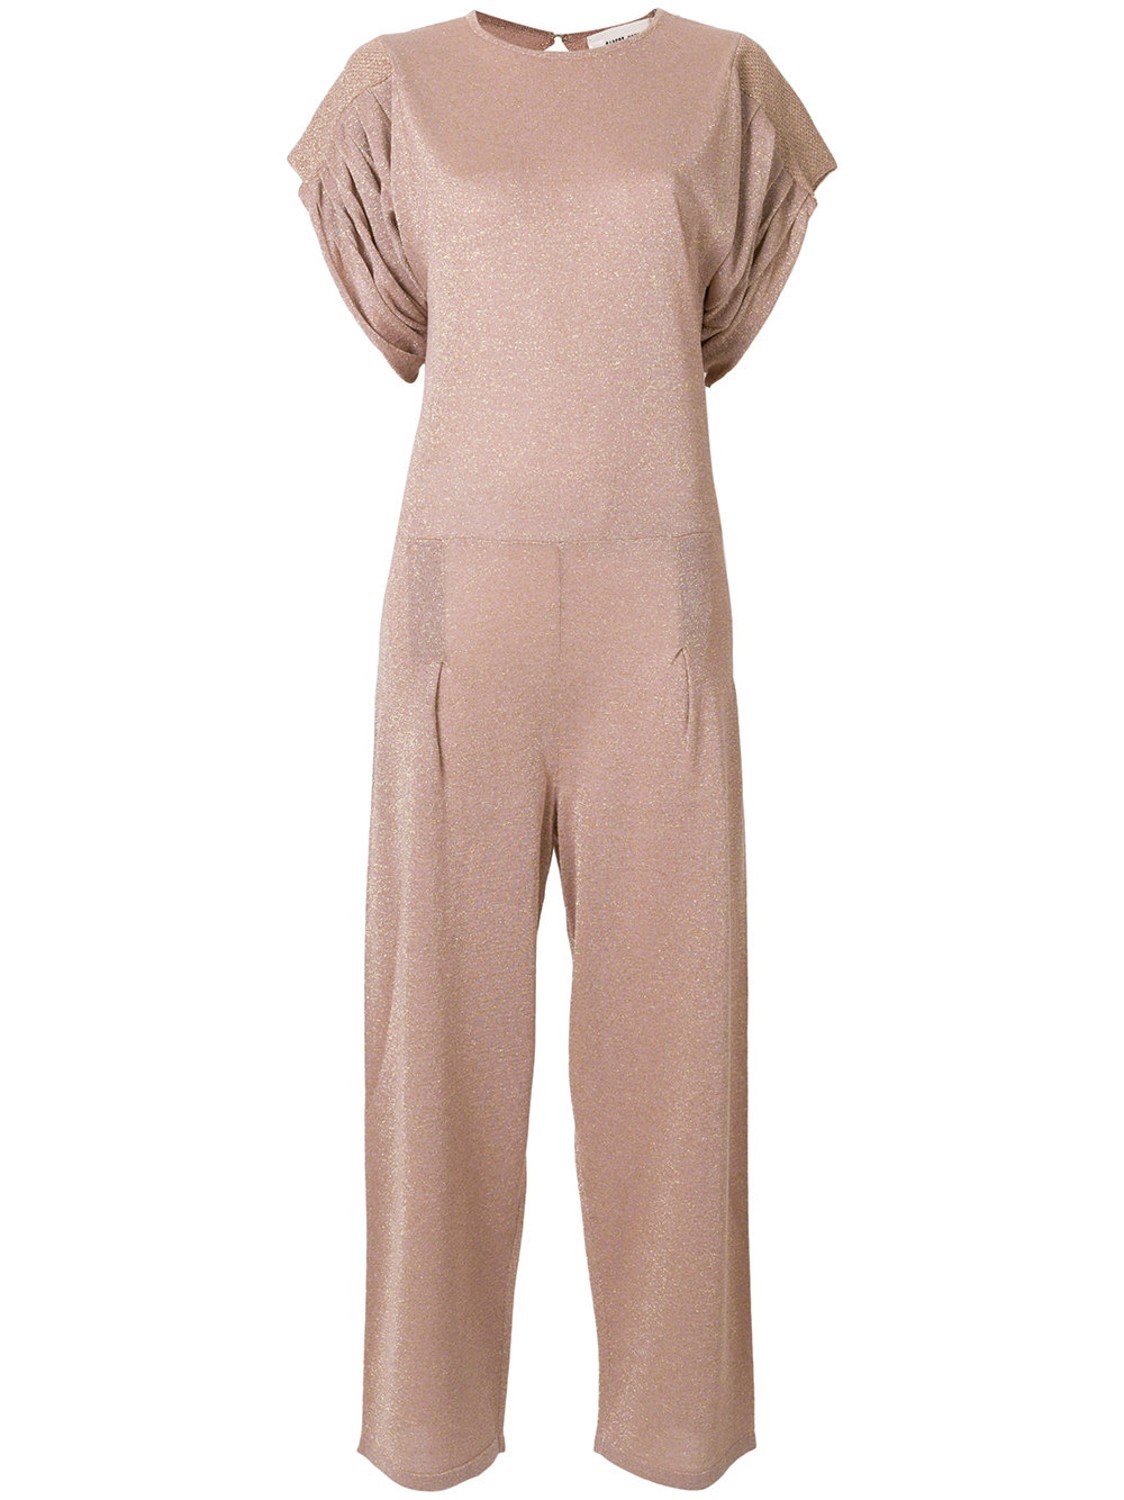 shop Circus Hotel  Dresses: Jumpsuit Circus Hotel, in light pink color, in lurex fabric, closure back, low cut back. number 1171